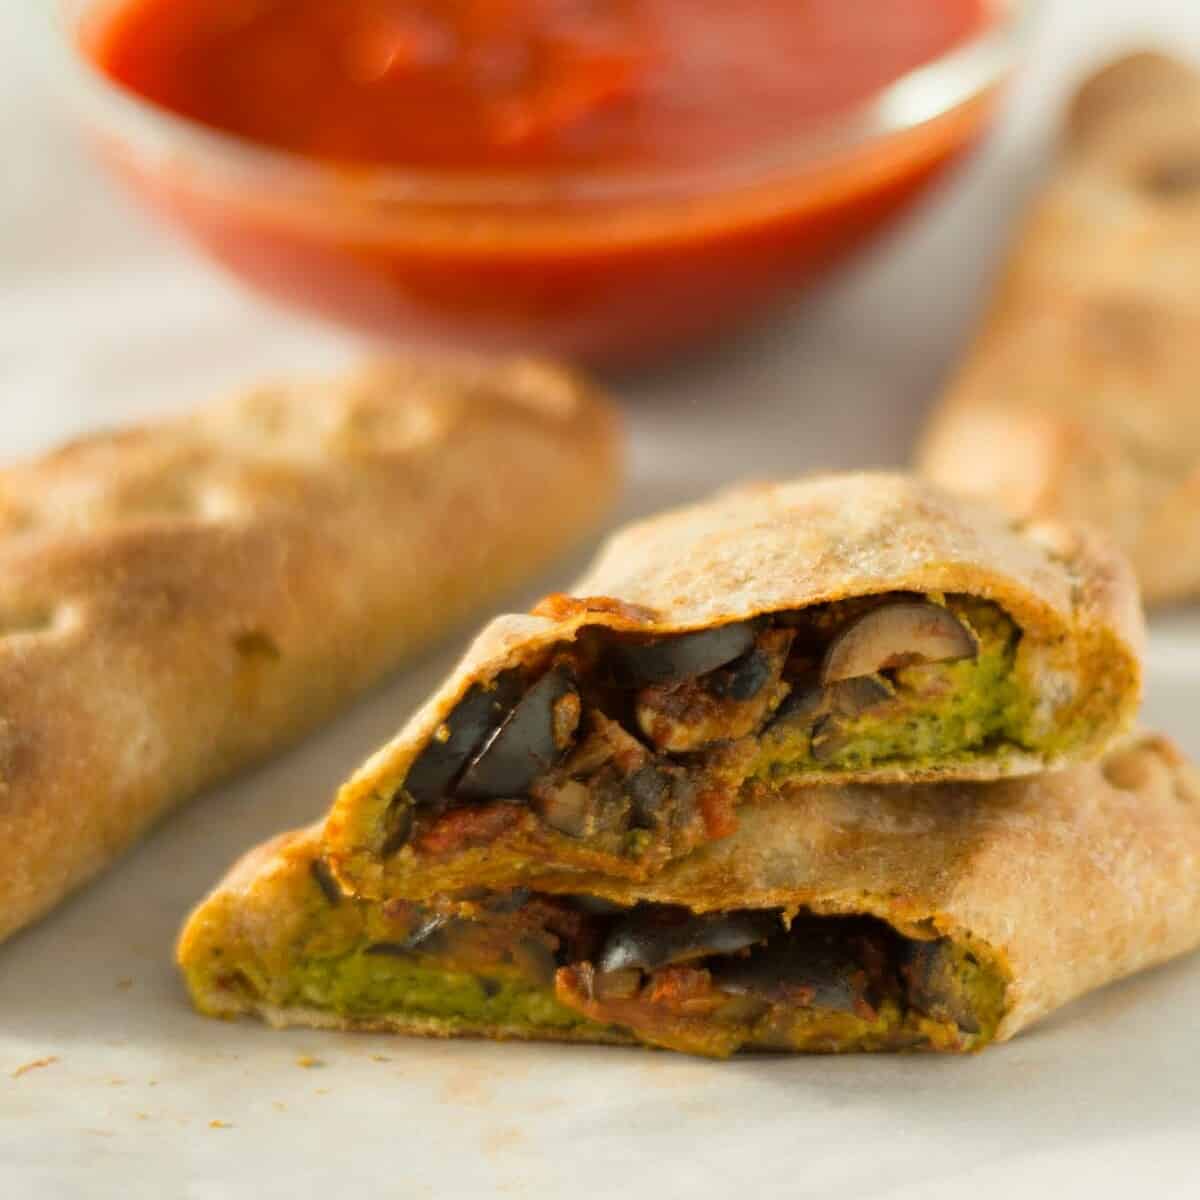  Whether you're vegan or not, this Mexican calzone is sure to be a new favorite.